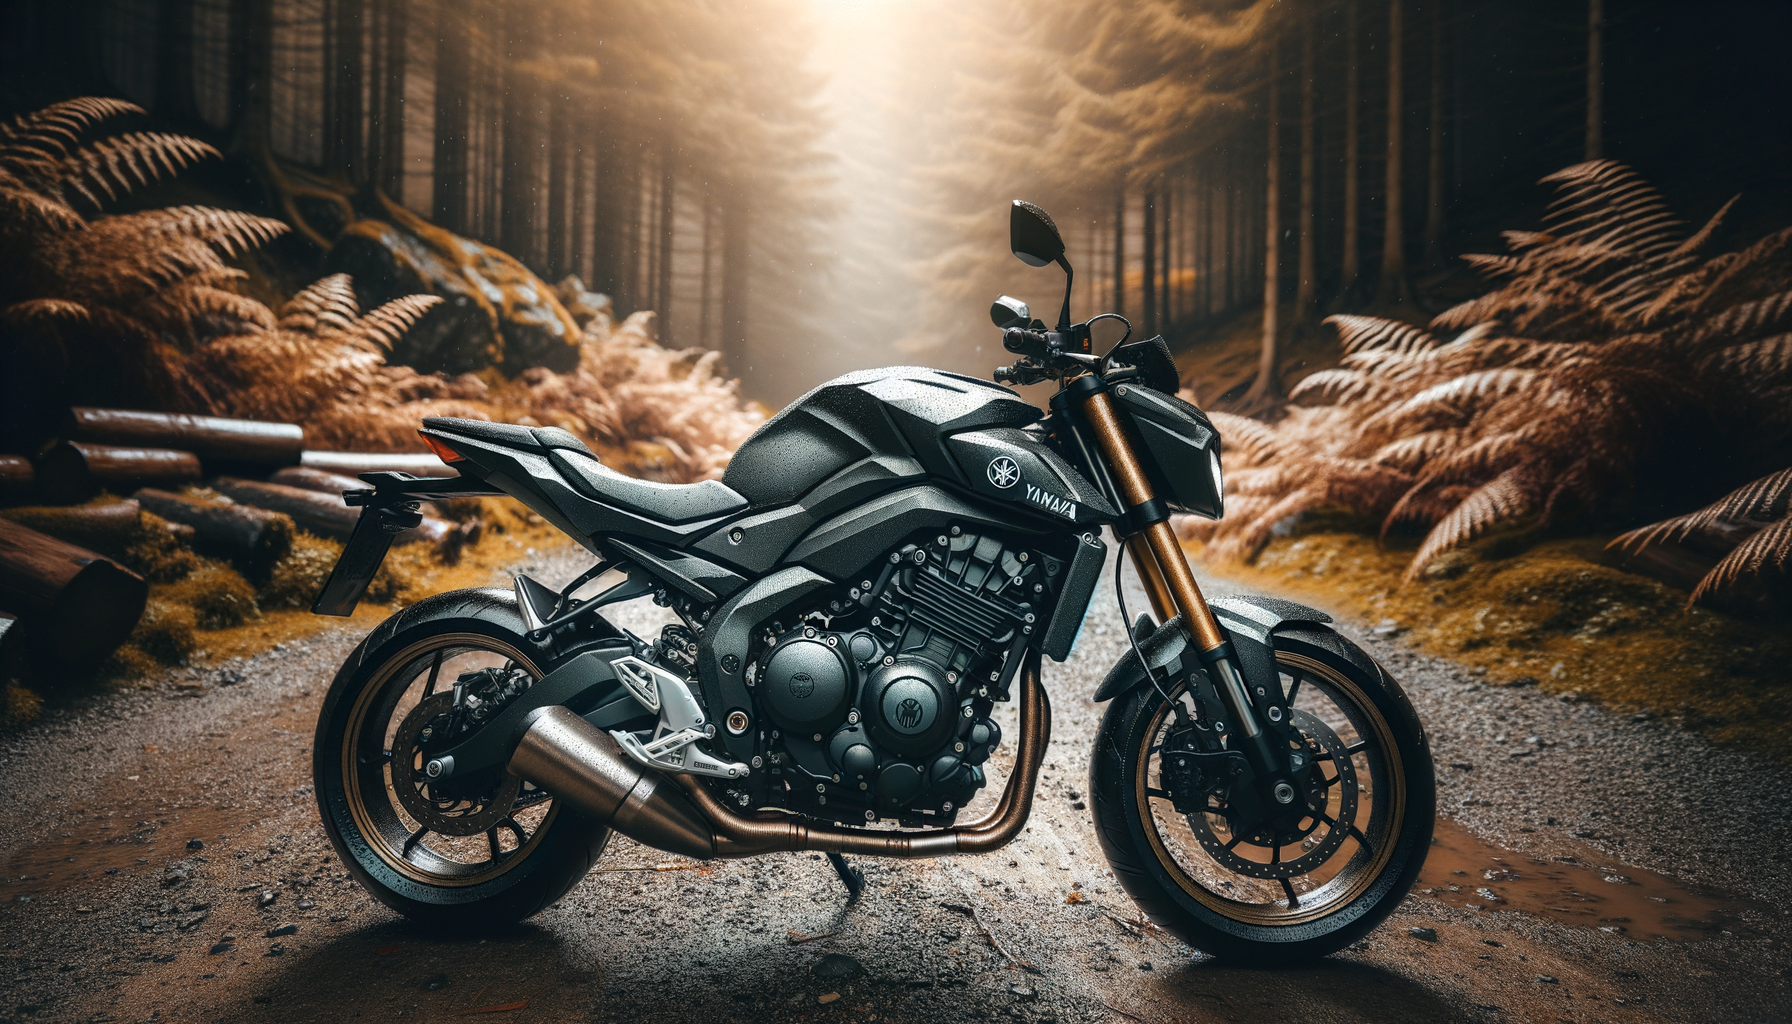 discover the exhilarating thrill of the yamaha fz 150, a streetfighter's delight that's designed for pure adrenaline and excitement.